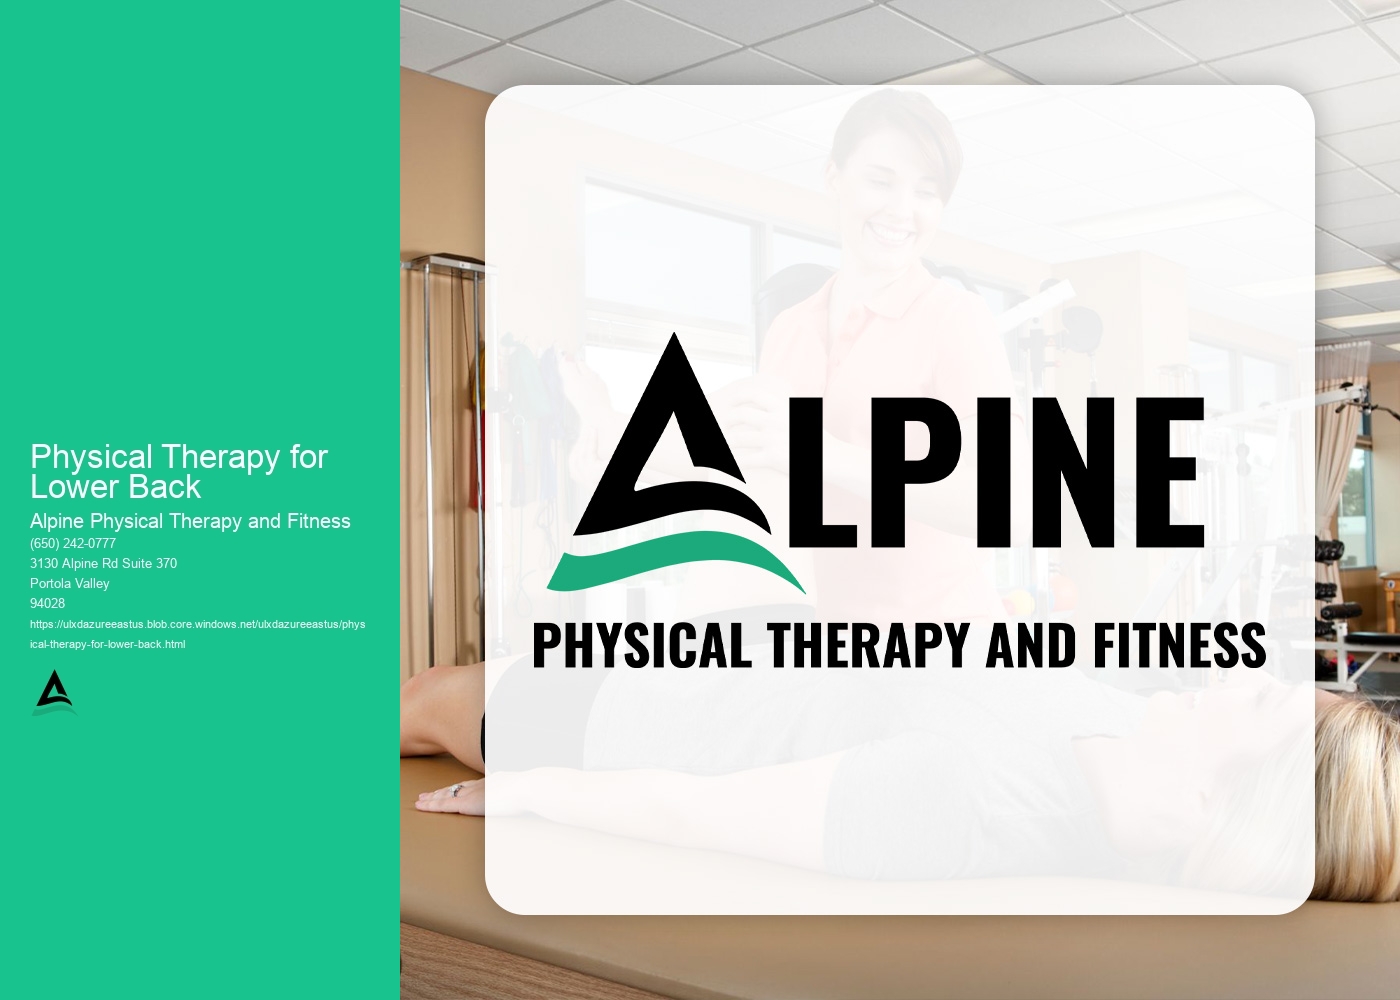 What are the potential benefits of manual therapy in treating lower back pain through physical therapy?